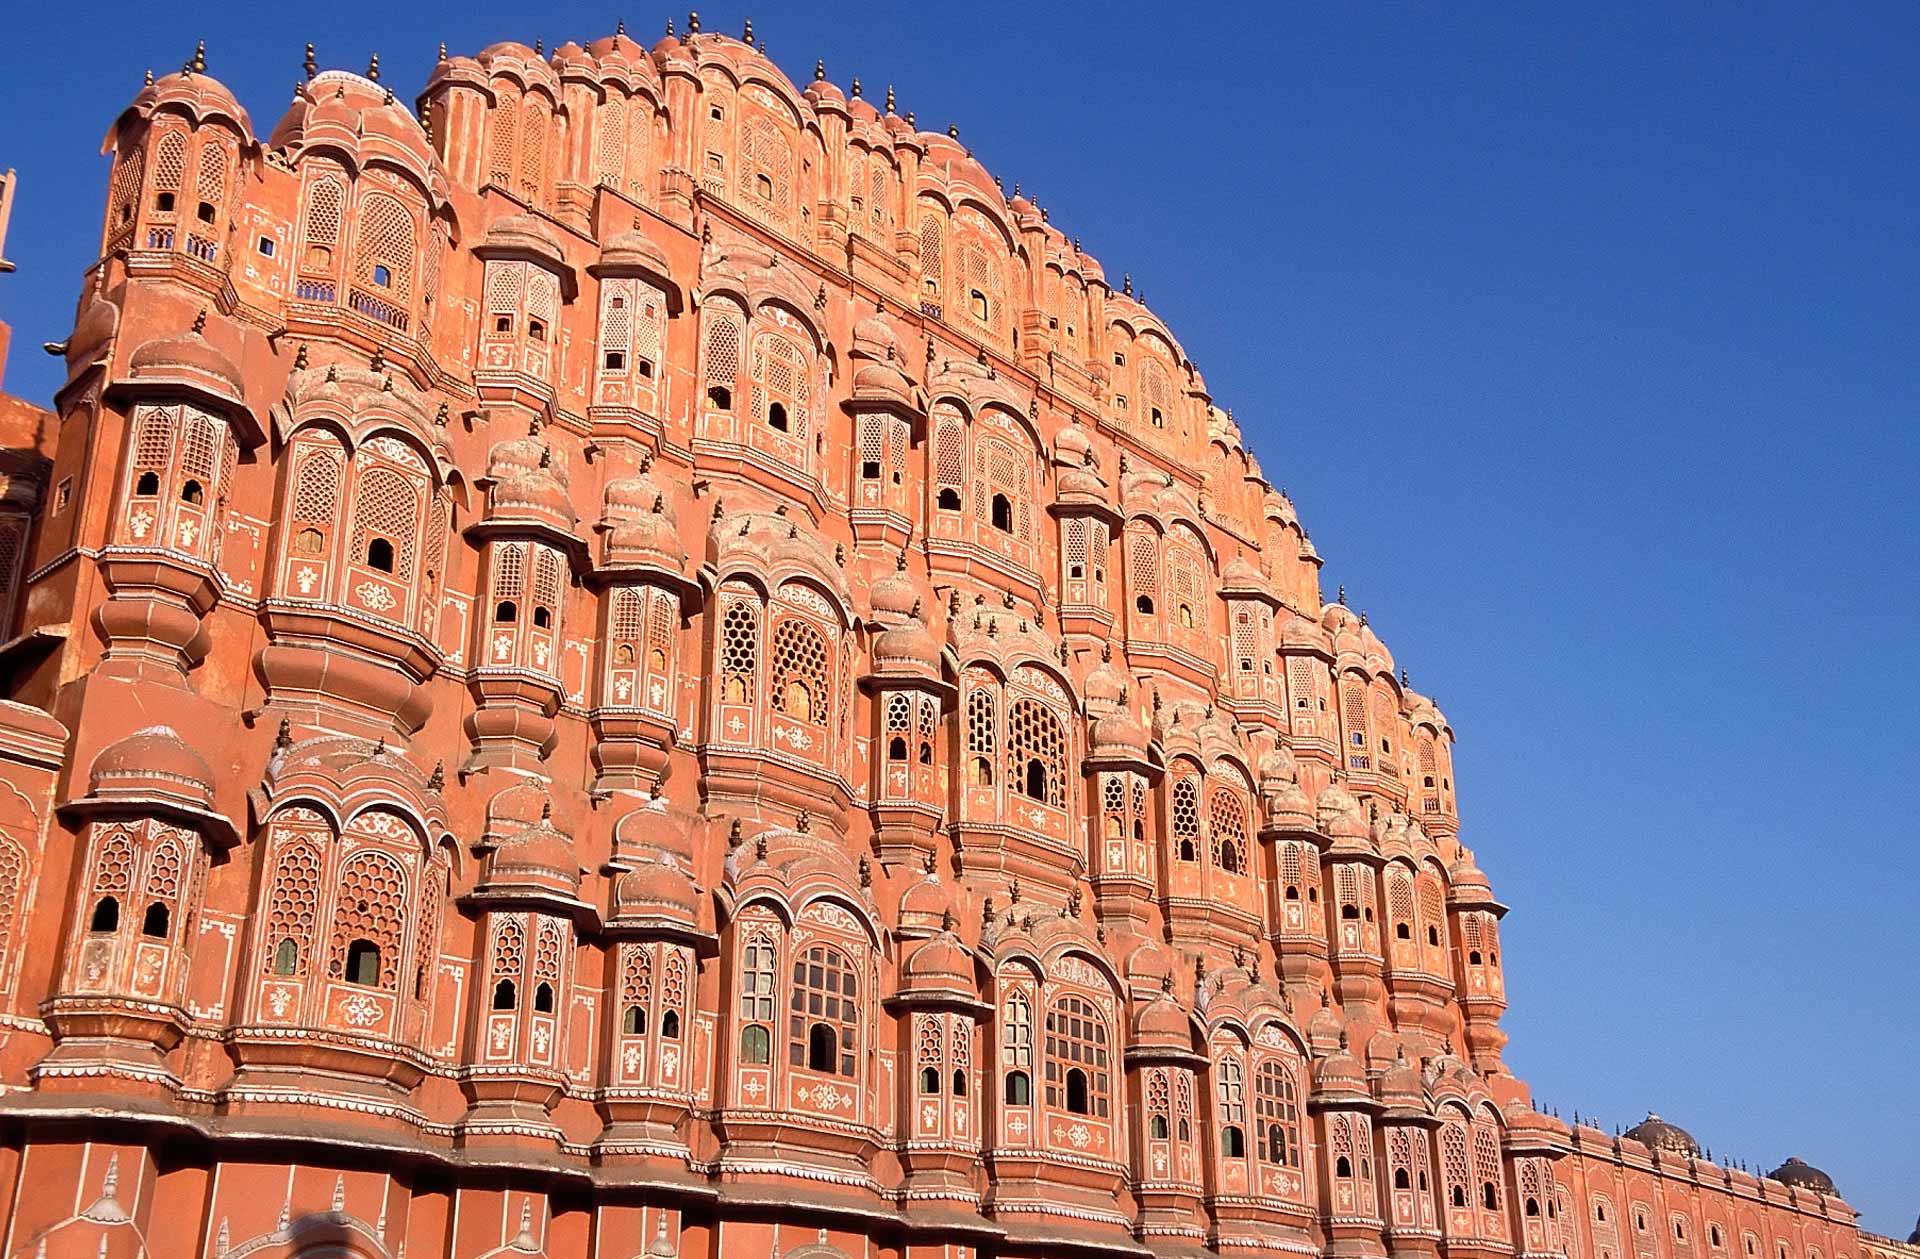 Hawa Mahal Palace or Palace of the Winds in Jaipur, Rajasthan state in India